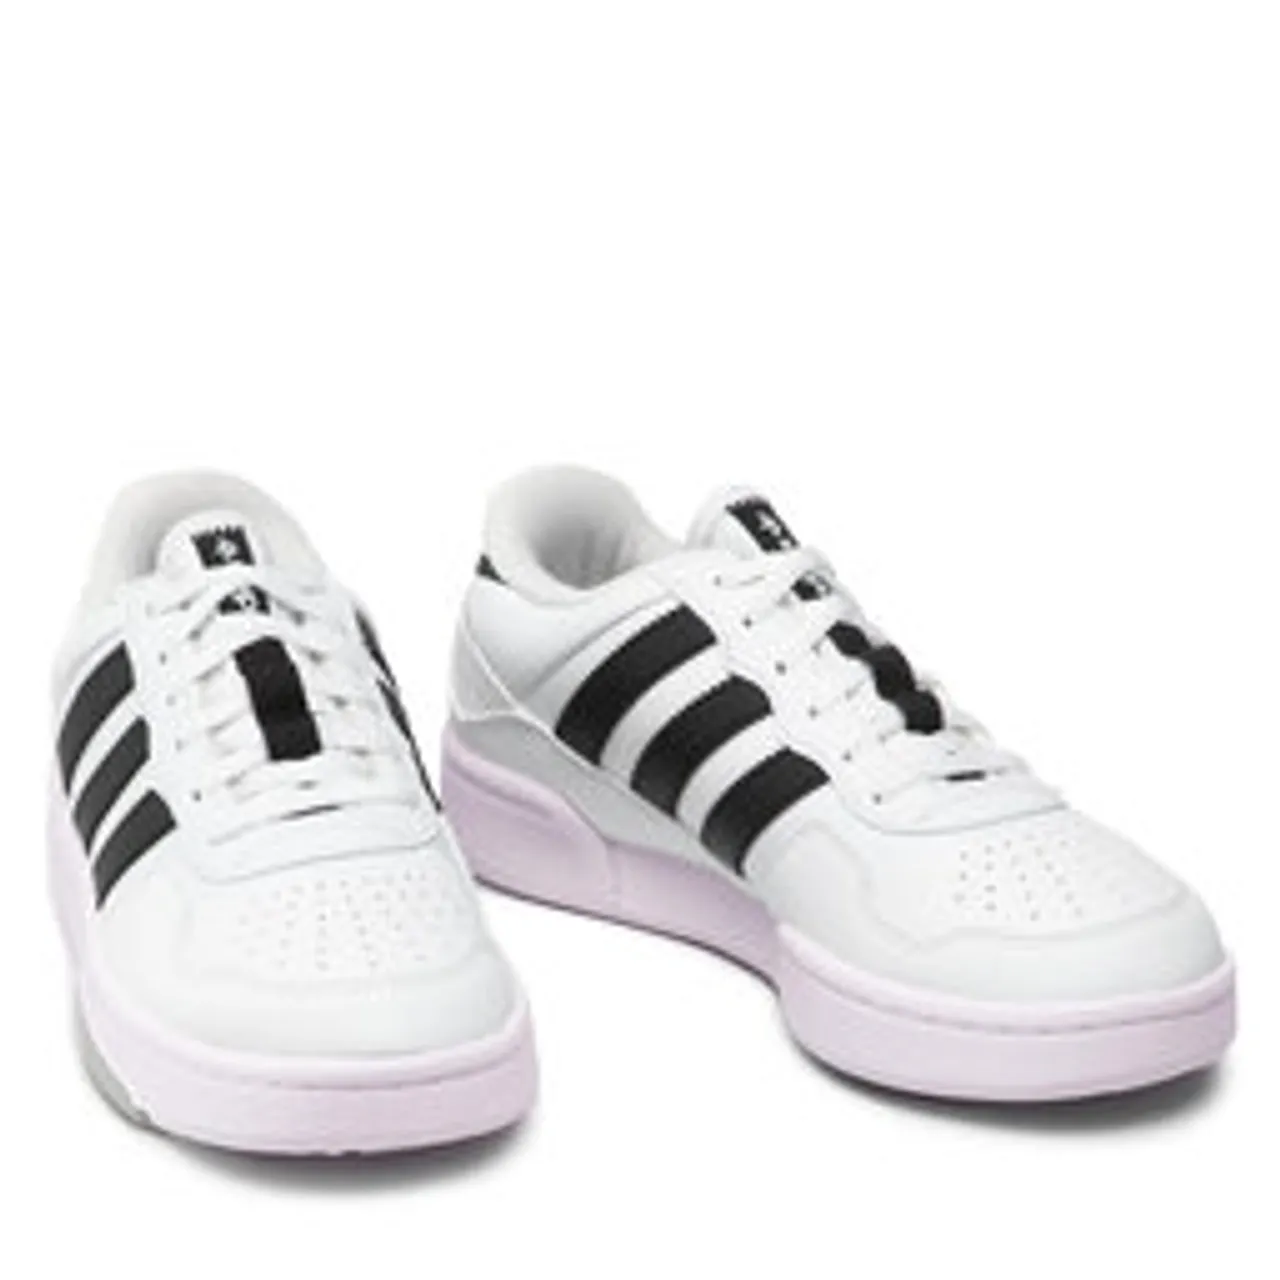 Schuhe adidas Courtic J GY3641 Ftwwht/Gretwo/Cblack